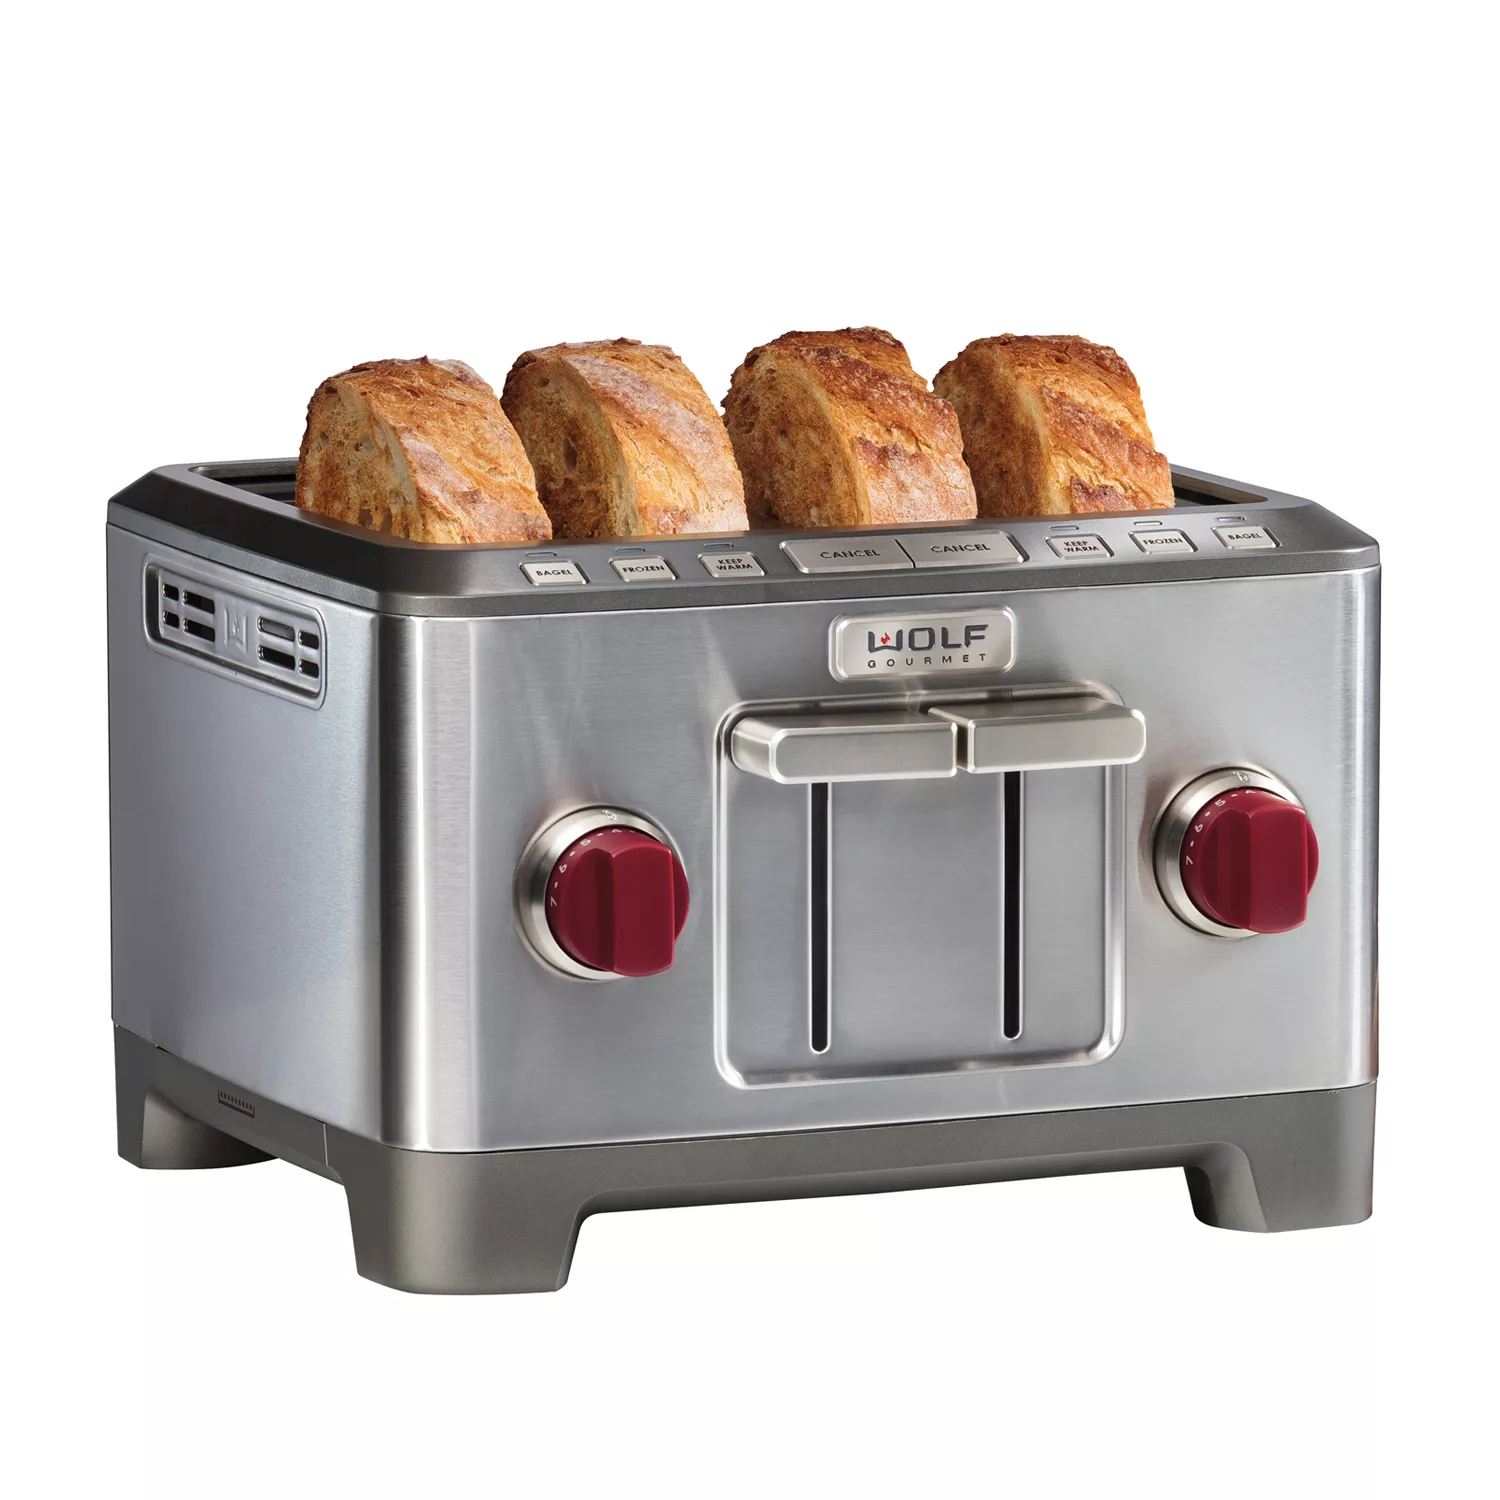 Double Toaster